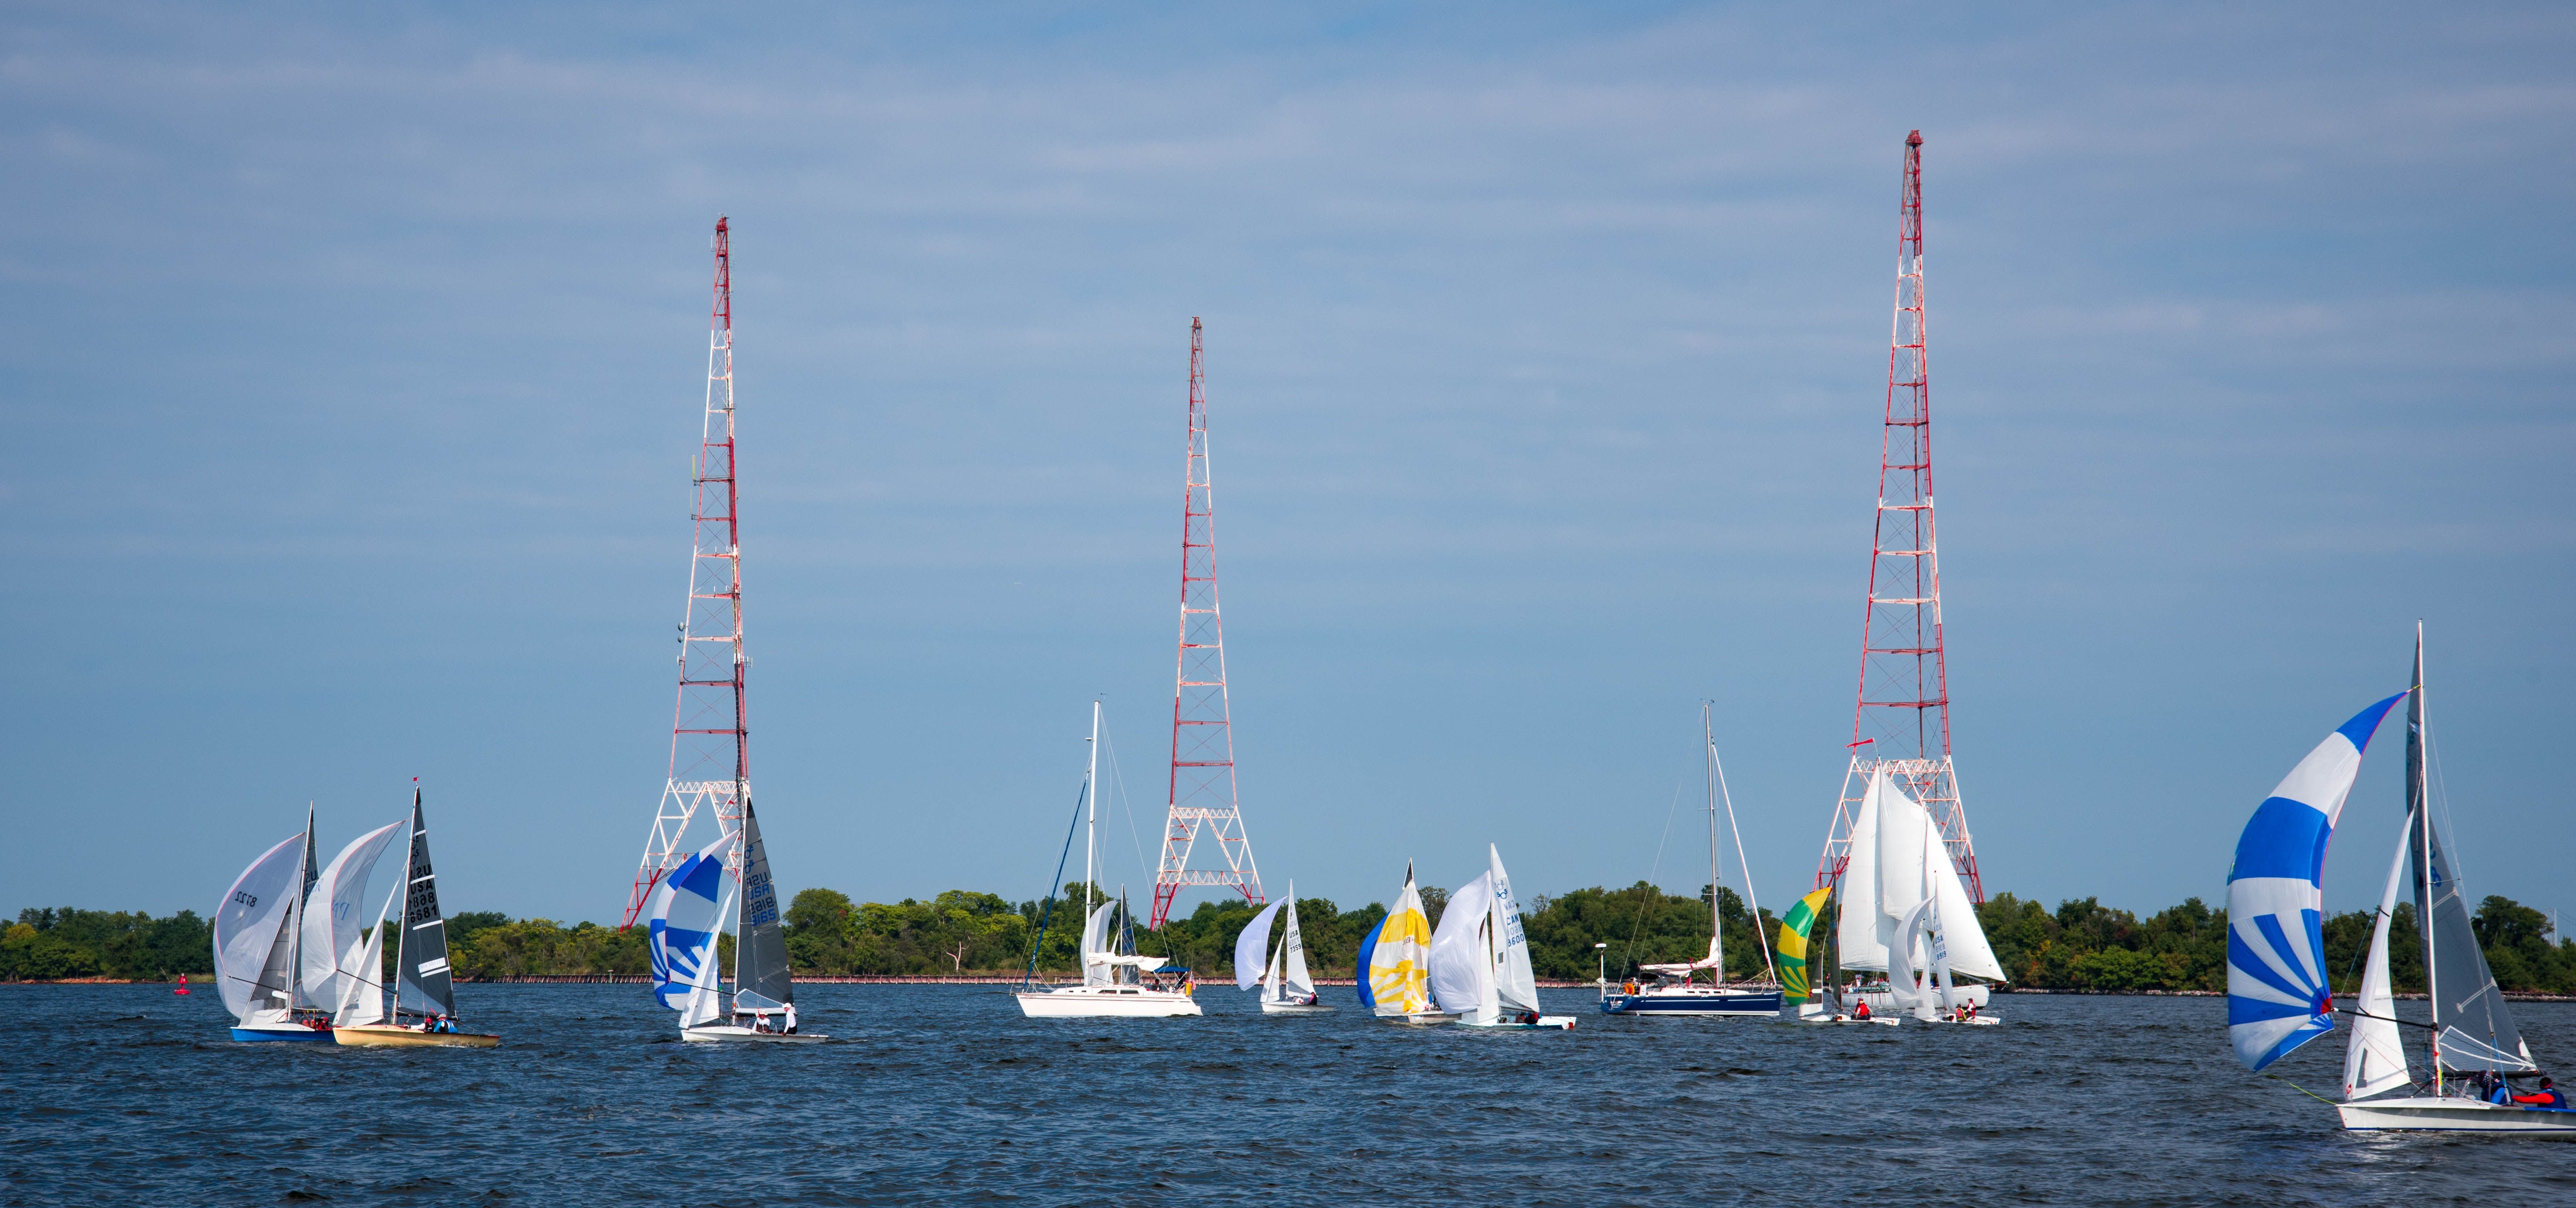 Sailboats with colorful sails sailing in front of red and white towers